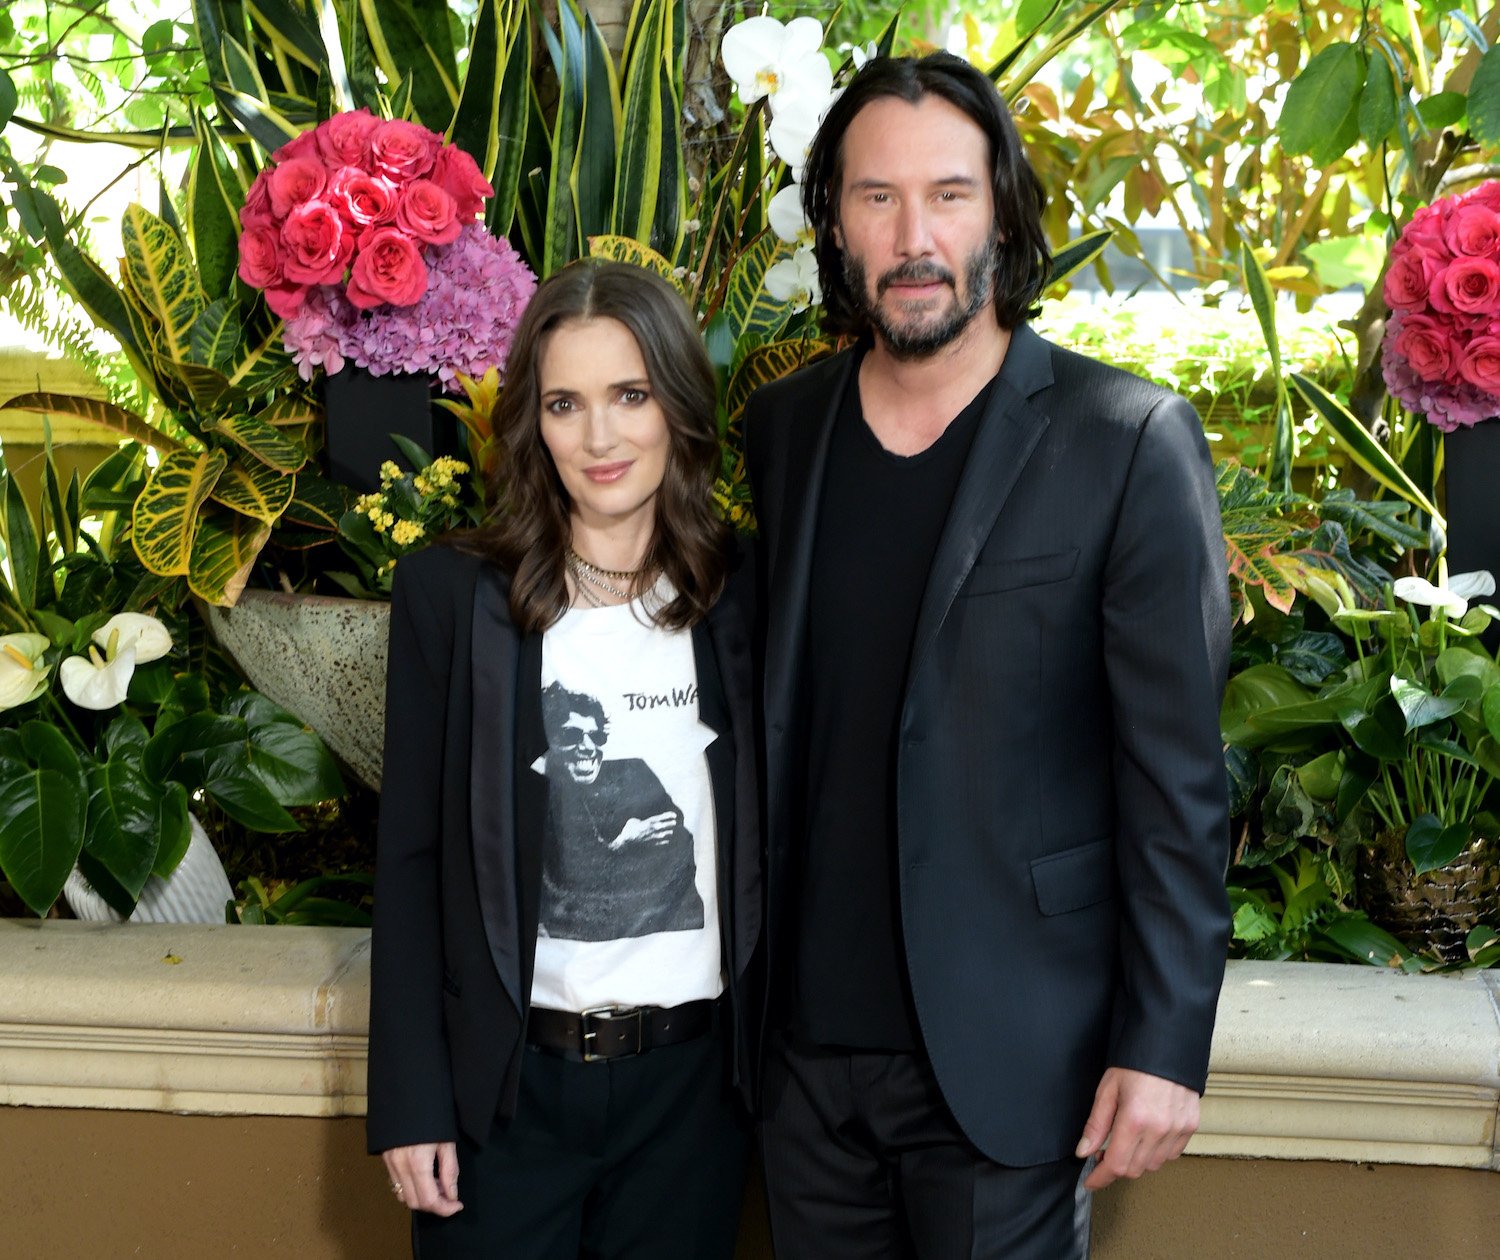 Winona Ryder and Keanu Reeves attend a photo call for 'Destination Wedding' in 2018 